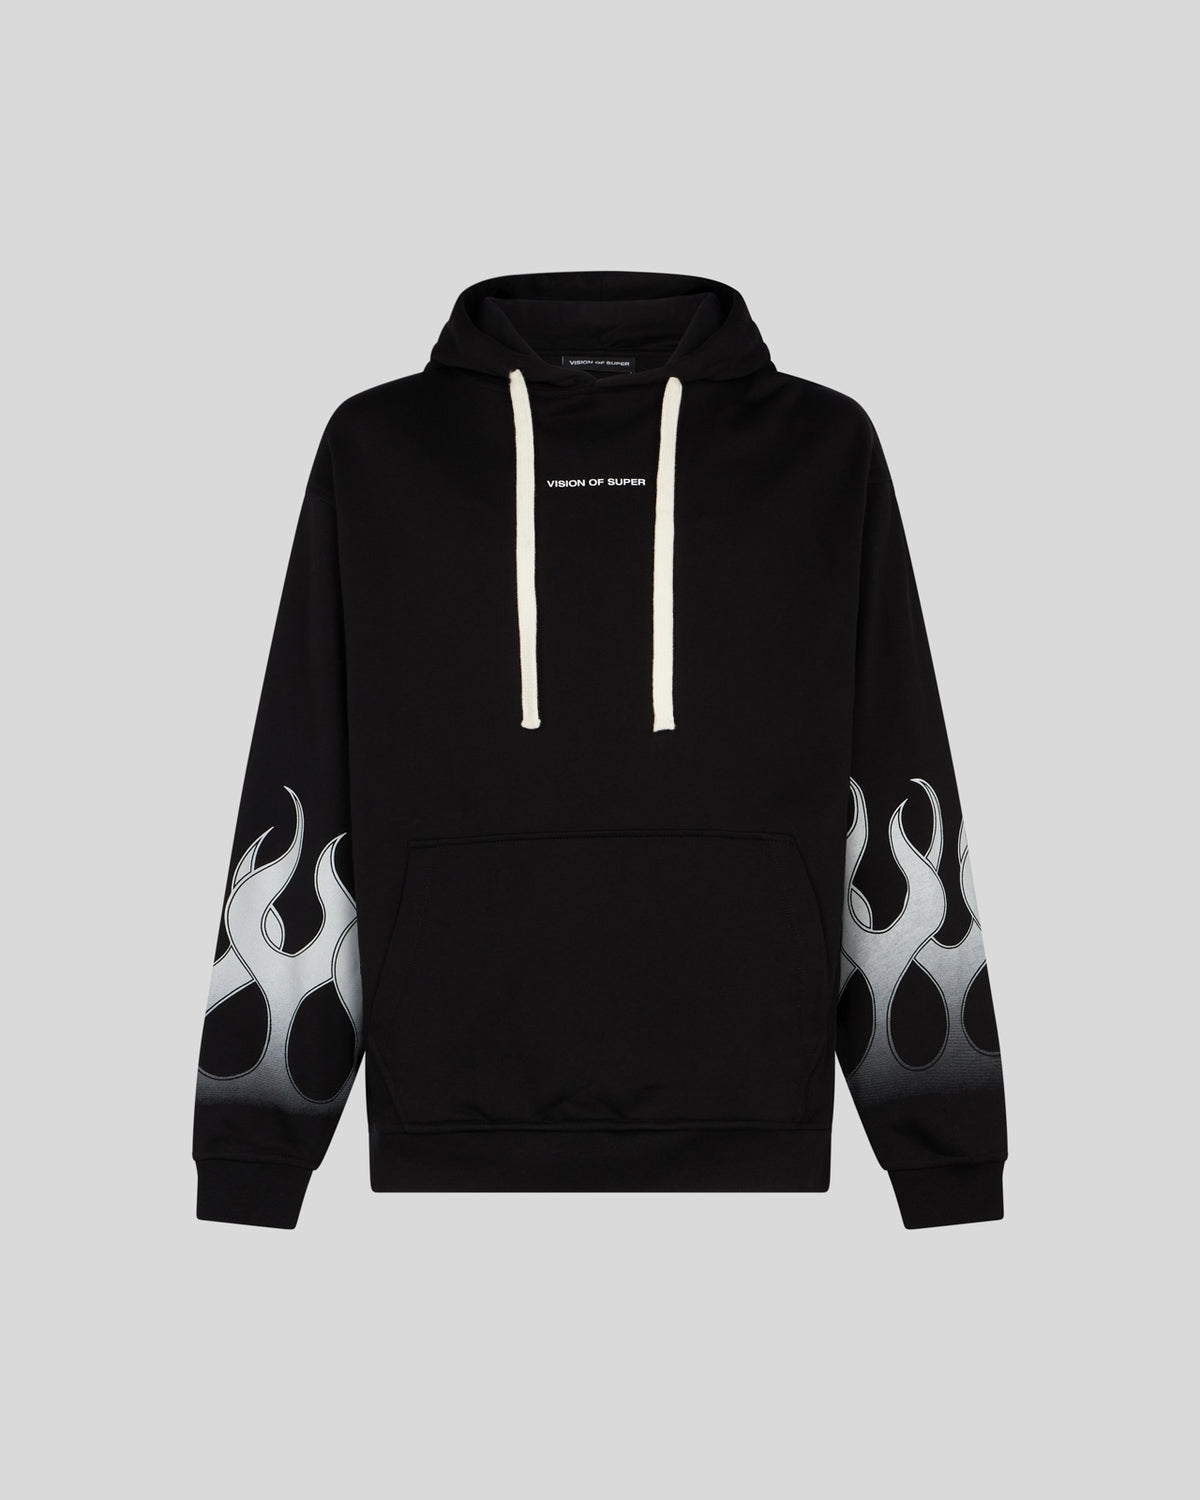 VISION OF SUPER BLACK HOODIE WITH WHITE RACING FLAMES